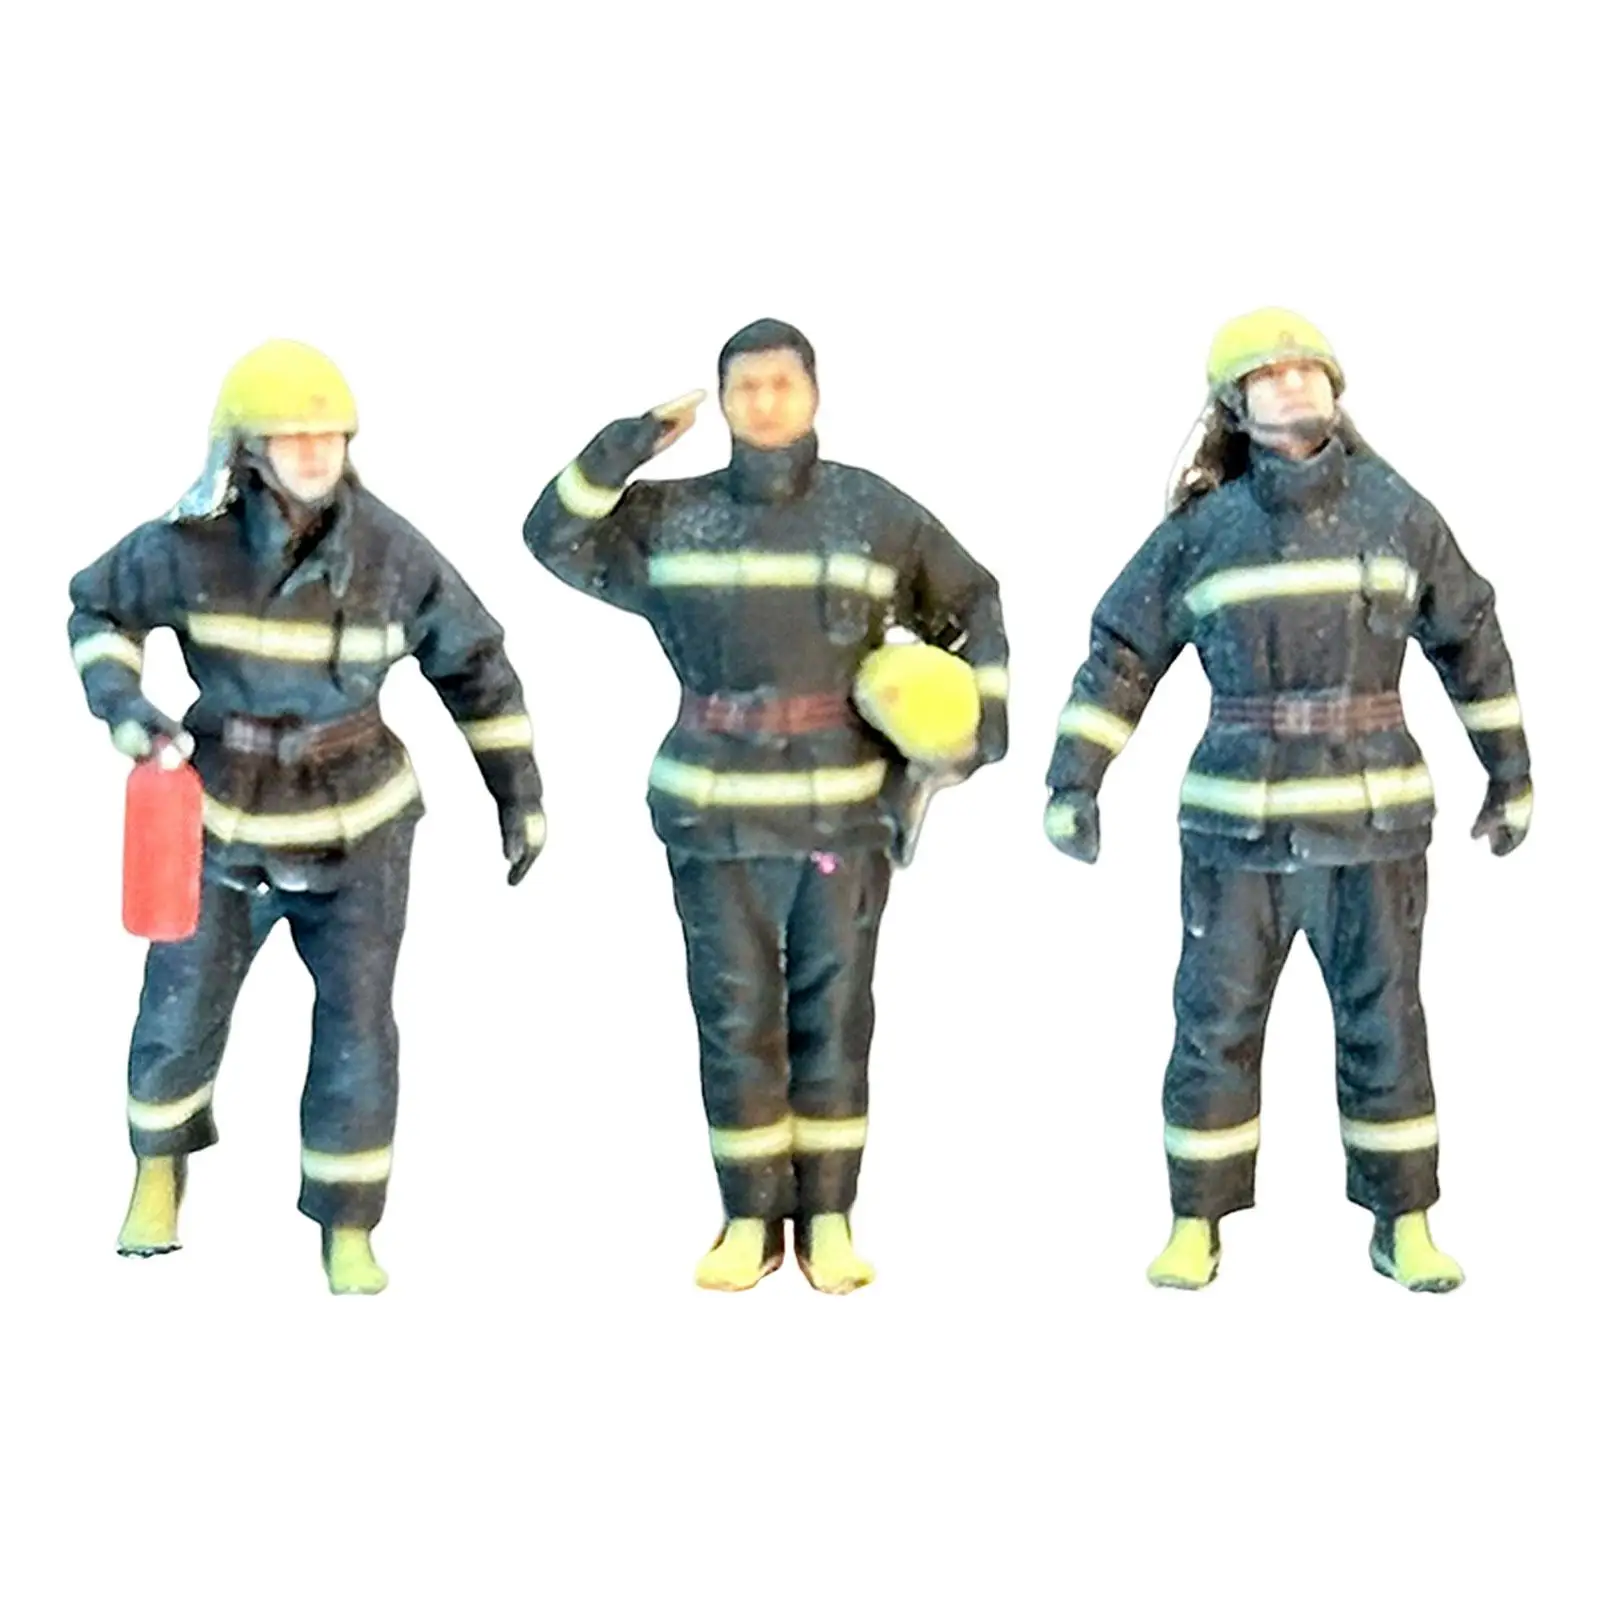 1/64 Resin Firefighter Figures Collectibles Sand Table Ornament for Miniature Scene Diorama Building Photography Props Layout